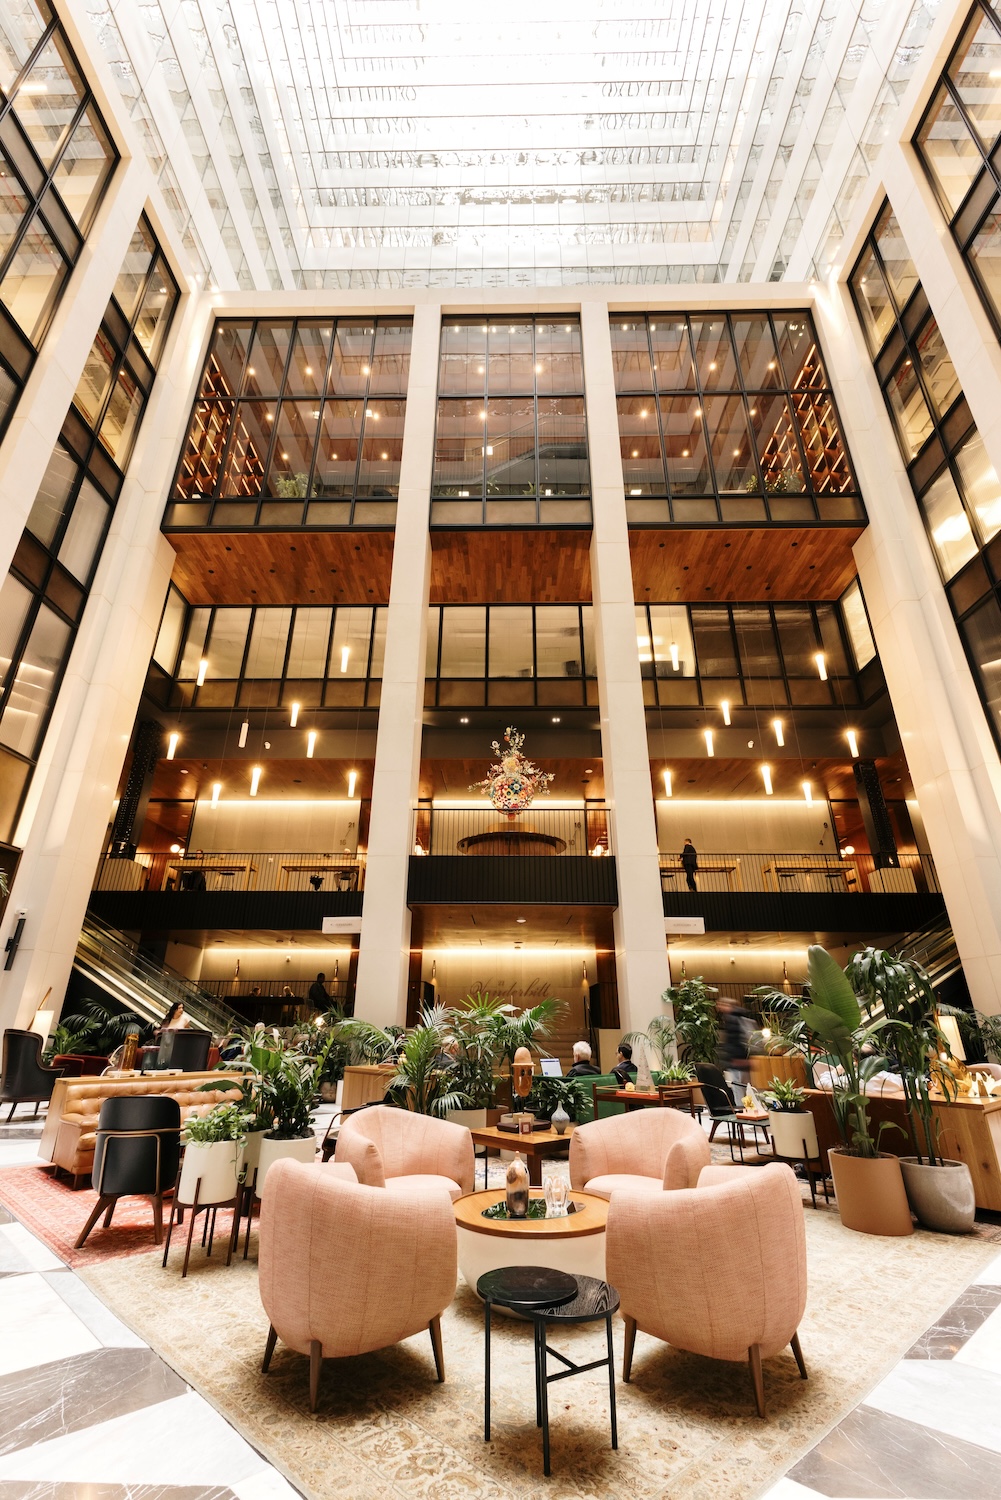 Photograph of the Palm Court lobby with 29-story atrium and direct connection to Grand Central Station, by Sophia Sahara